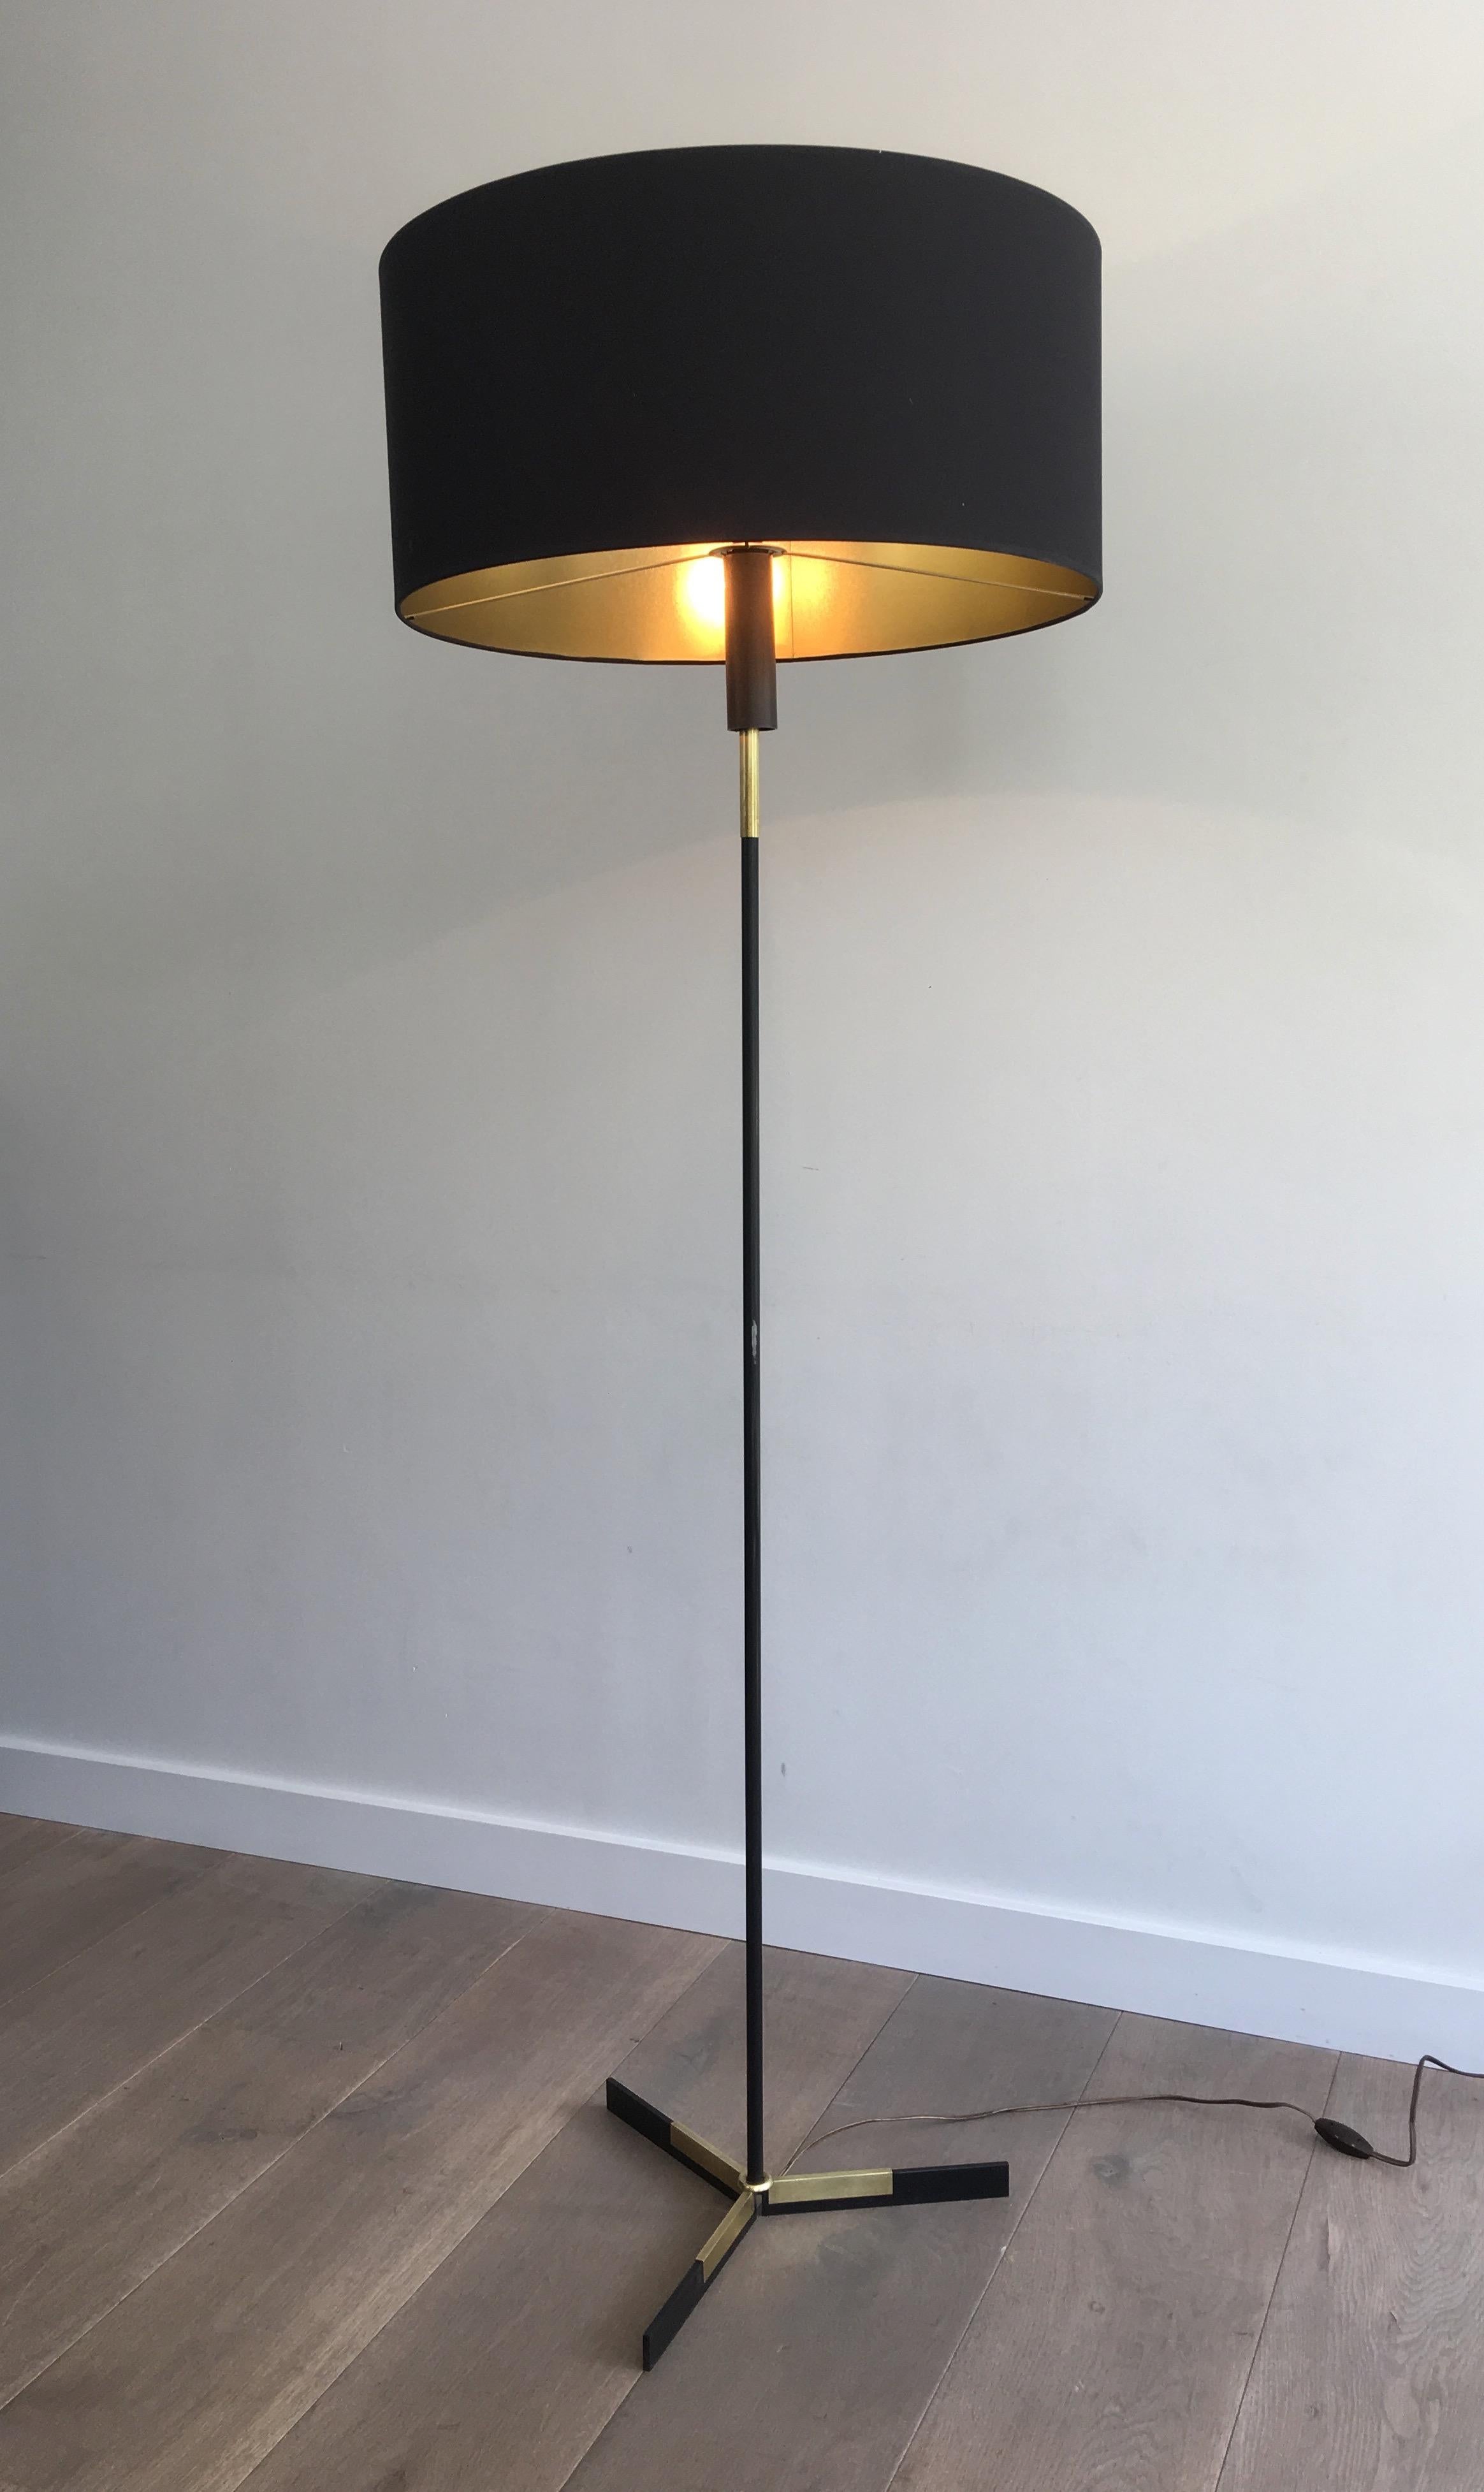 Black Lacquered and Brass Design Floor Lamp, French, circa 1950 For Sale 11